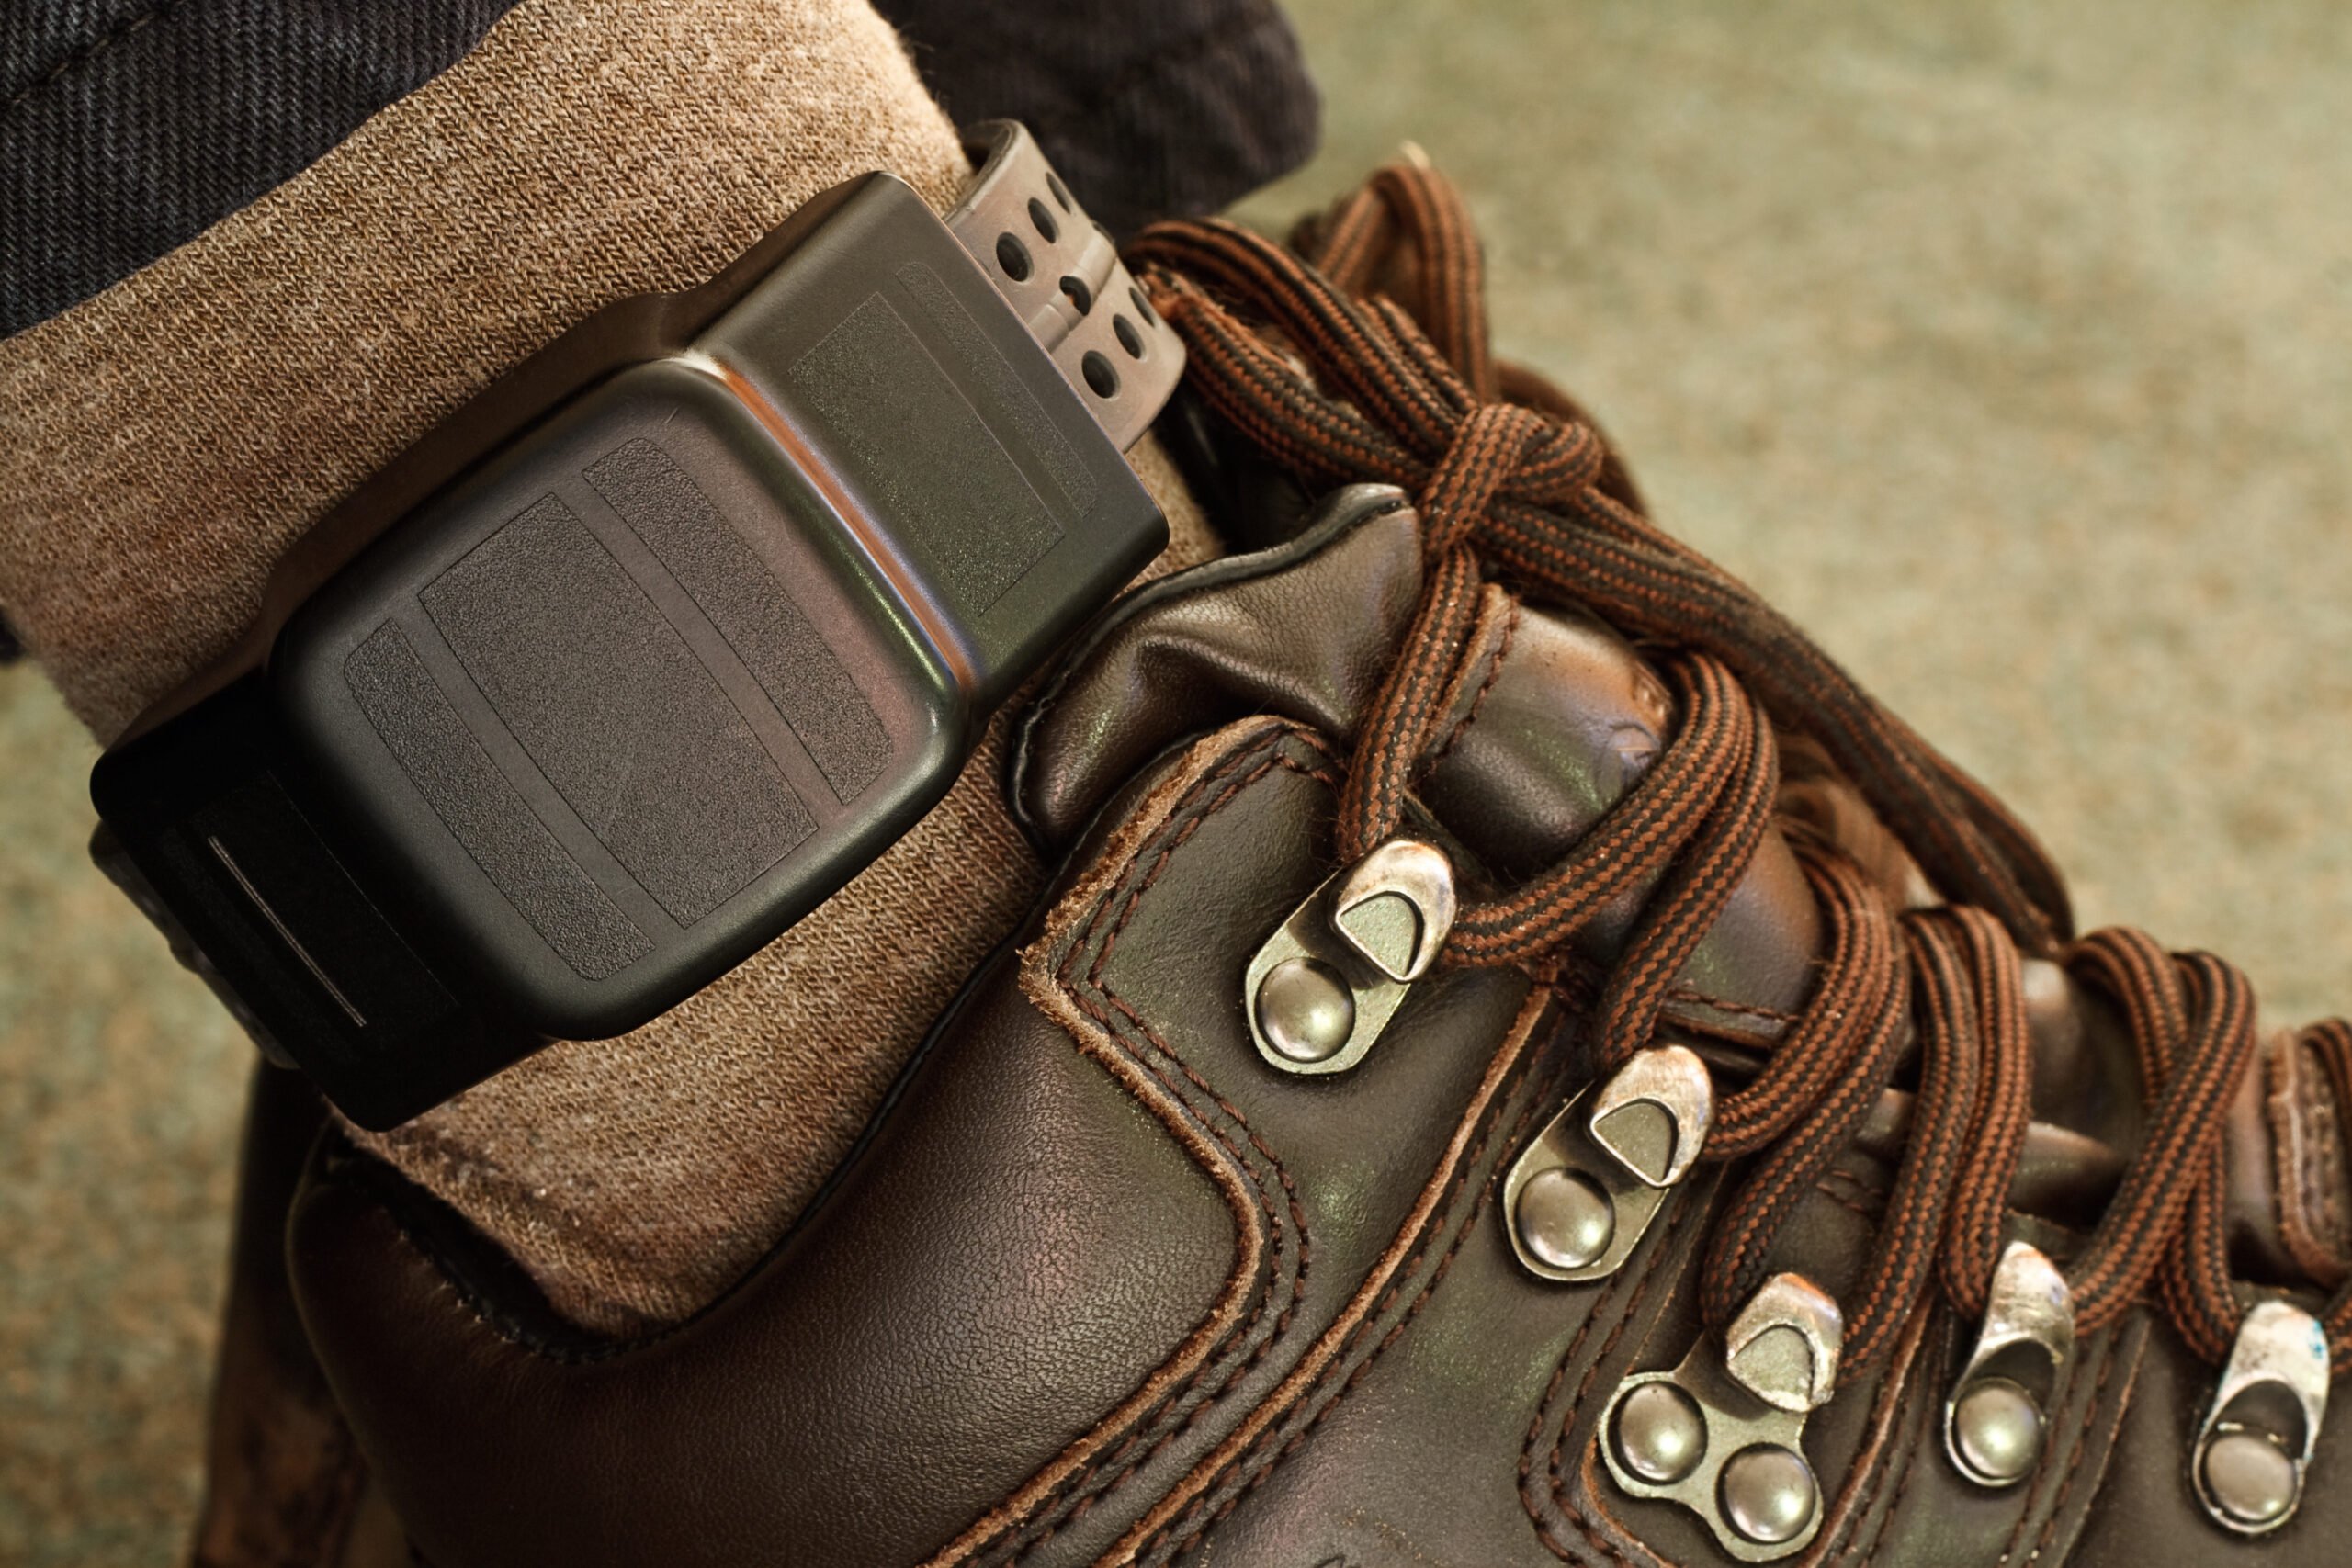 A stock photo of a GPS monitoring anklet, such as the kind used by people on probation or parole in Texas. It's worn on the ankle, above a brown hiking boot and looks a little like a smartwatch with a blank screen.